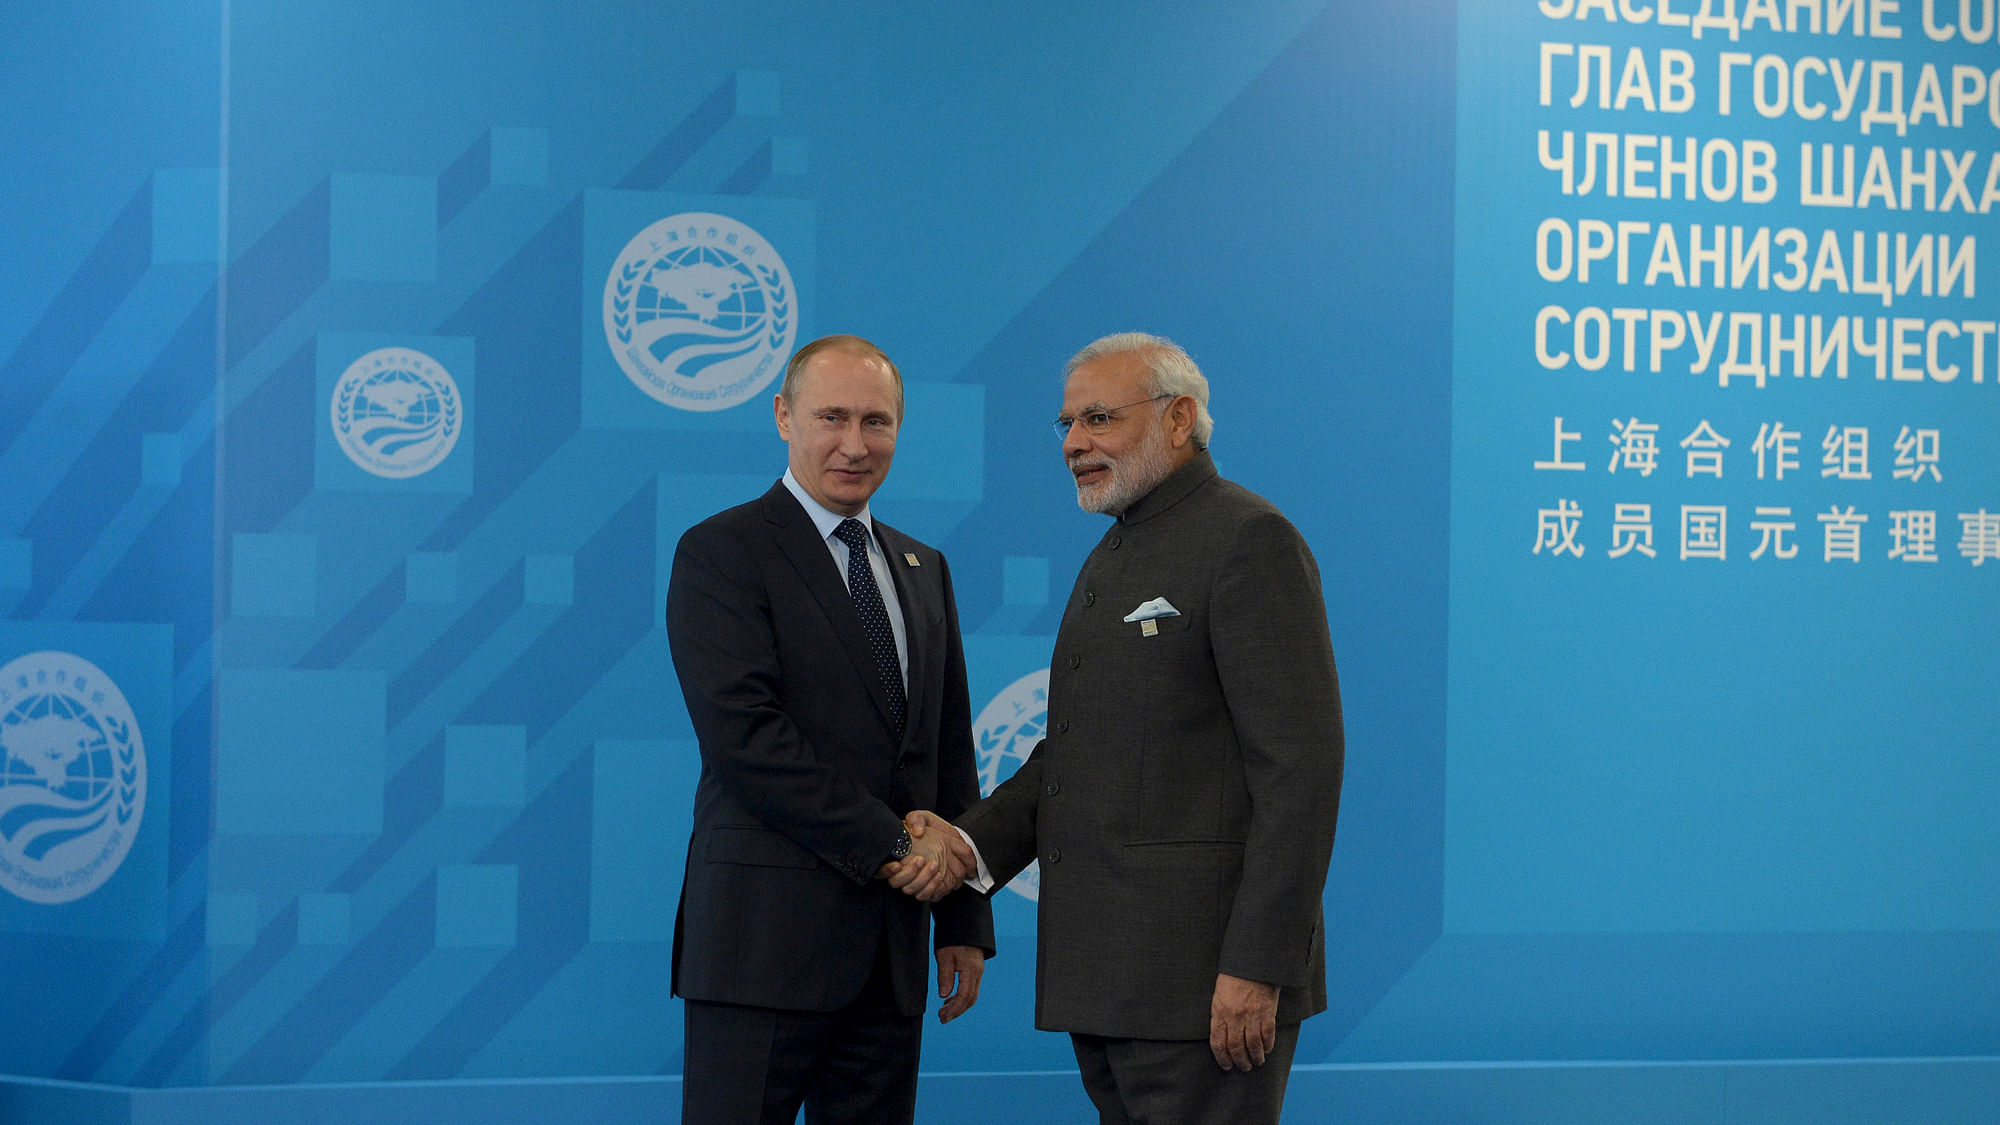 Russian President Vladimir Putin (left) shakes hands with Prime Minister Narendra Modi during the Shanghai Cooperation Organisation summit in Ufa, Russia, July 10, 2015. (Photo: Reuters)